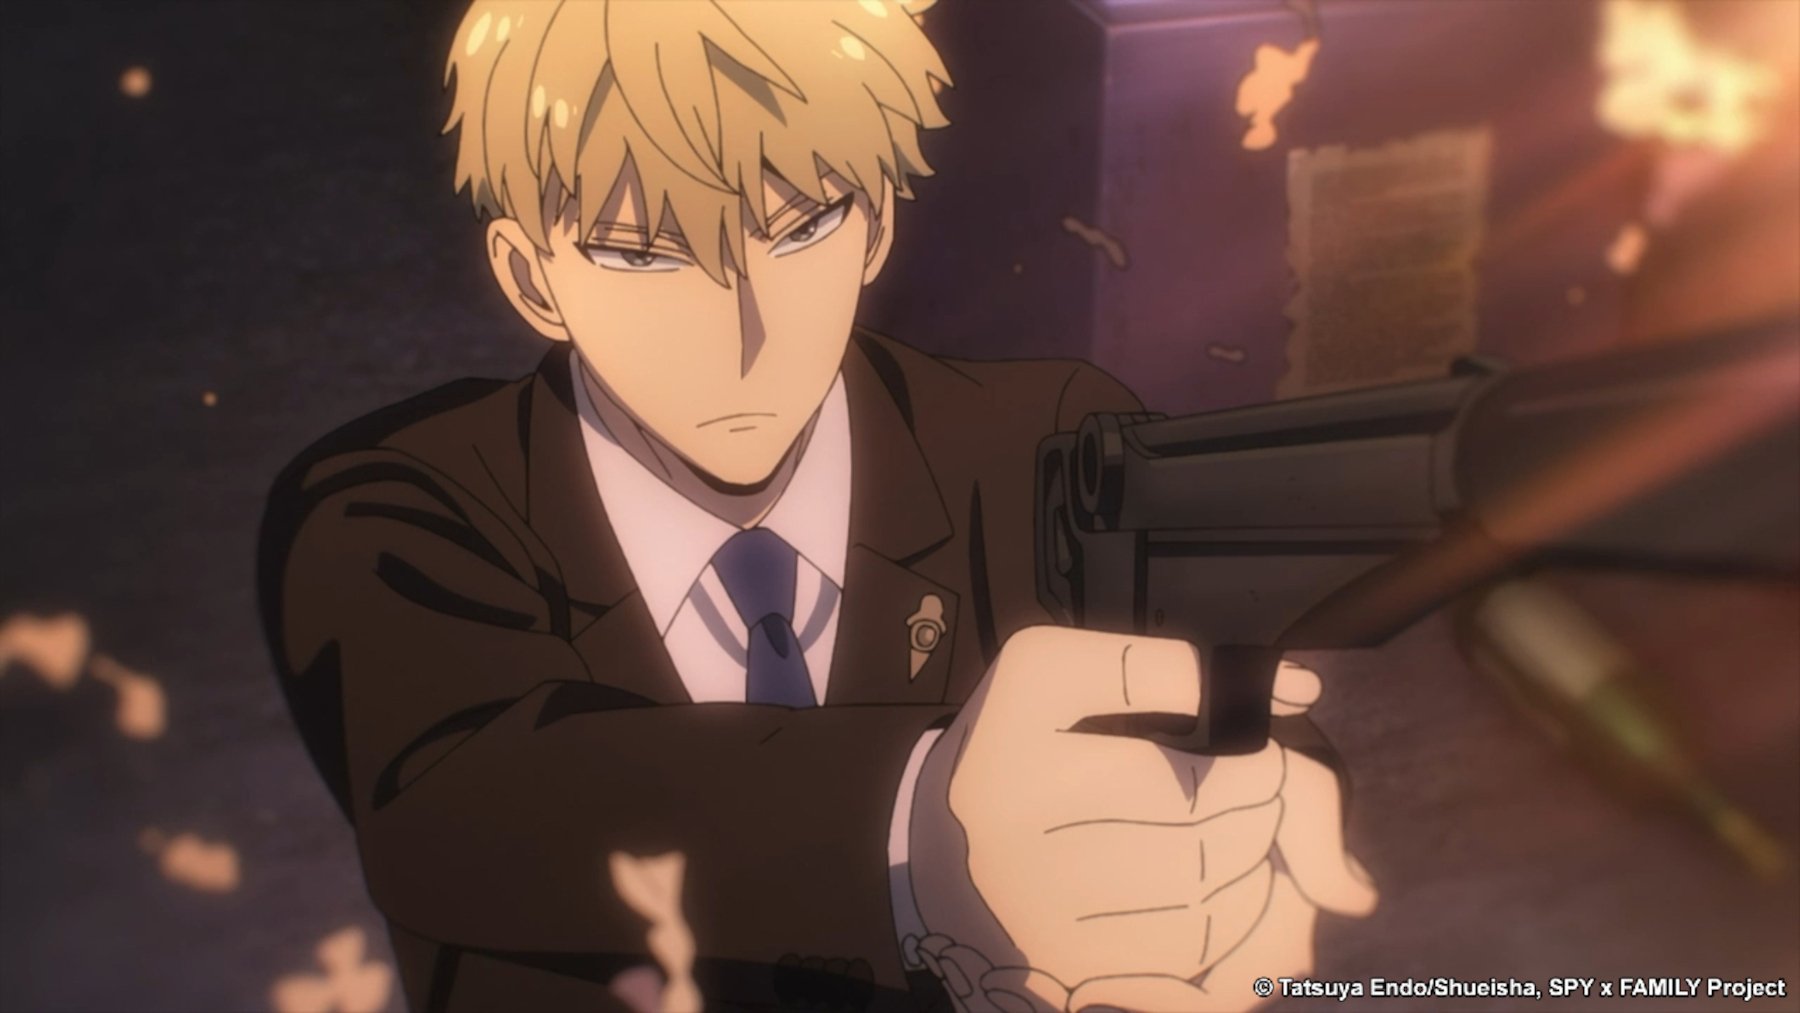 Spy x Family' Episode 10: Release Date, Time, Preview, and How to